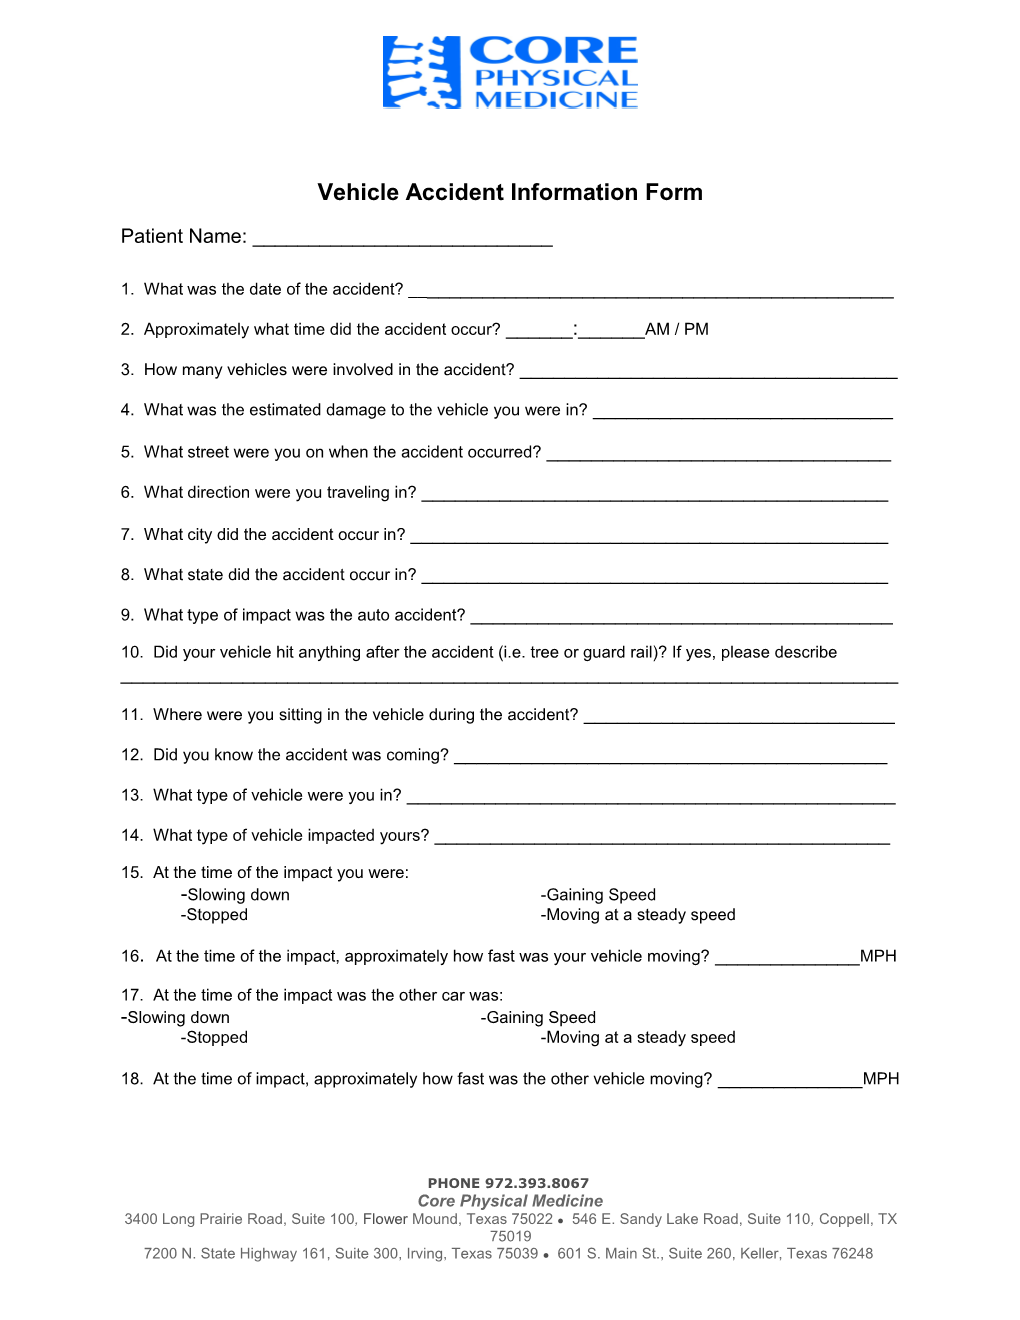 Vehicle Accident Information Form